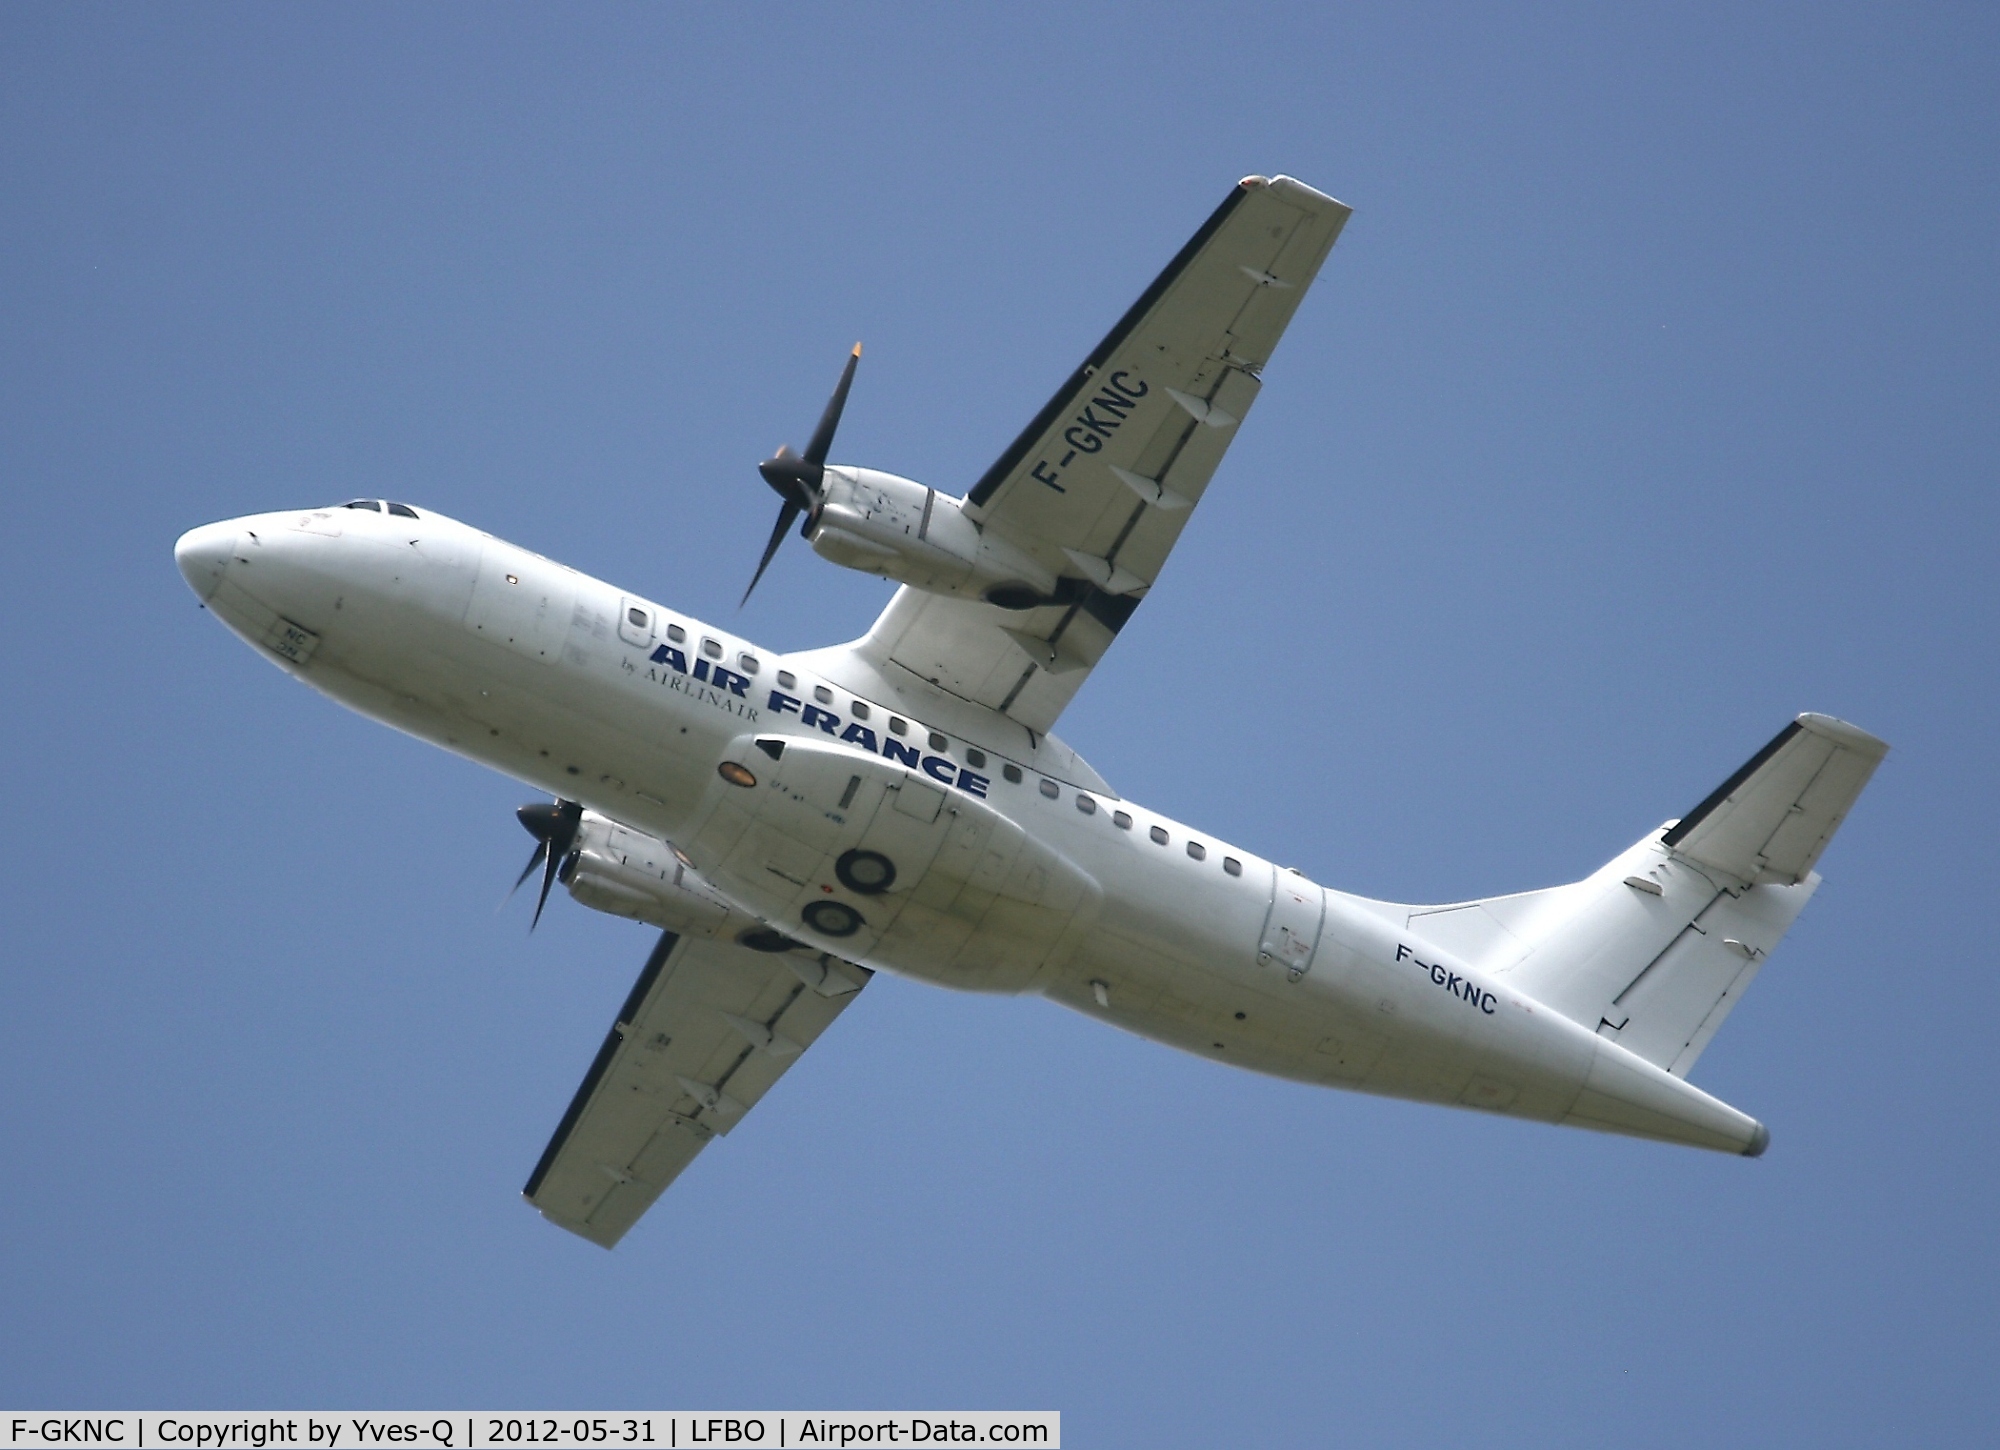 F-GKNC, 1991 ATR 42-300 C/N 230, Air France operated ATR 42-300 takes to the skies from Toulouse Blagnac Airport (LFBO-TLS)